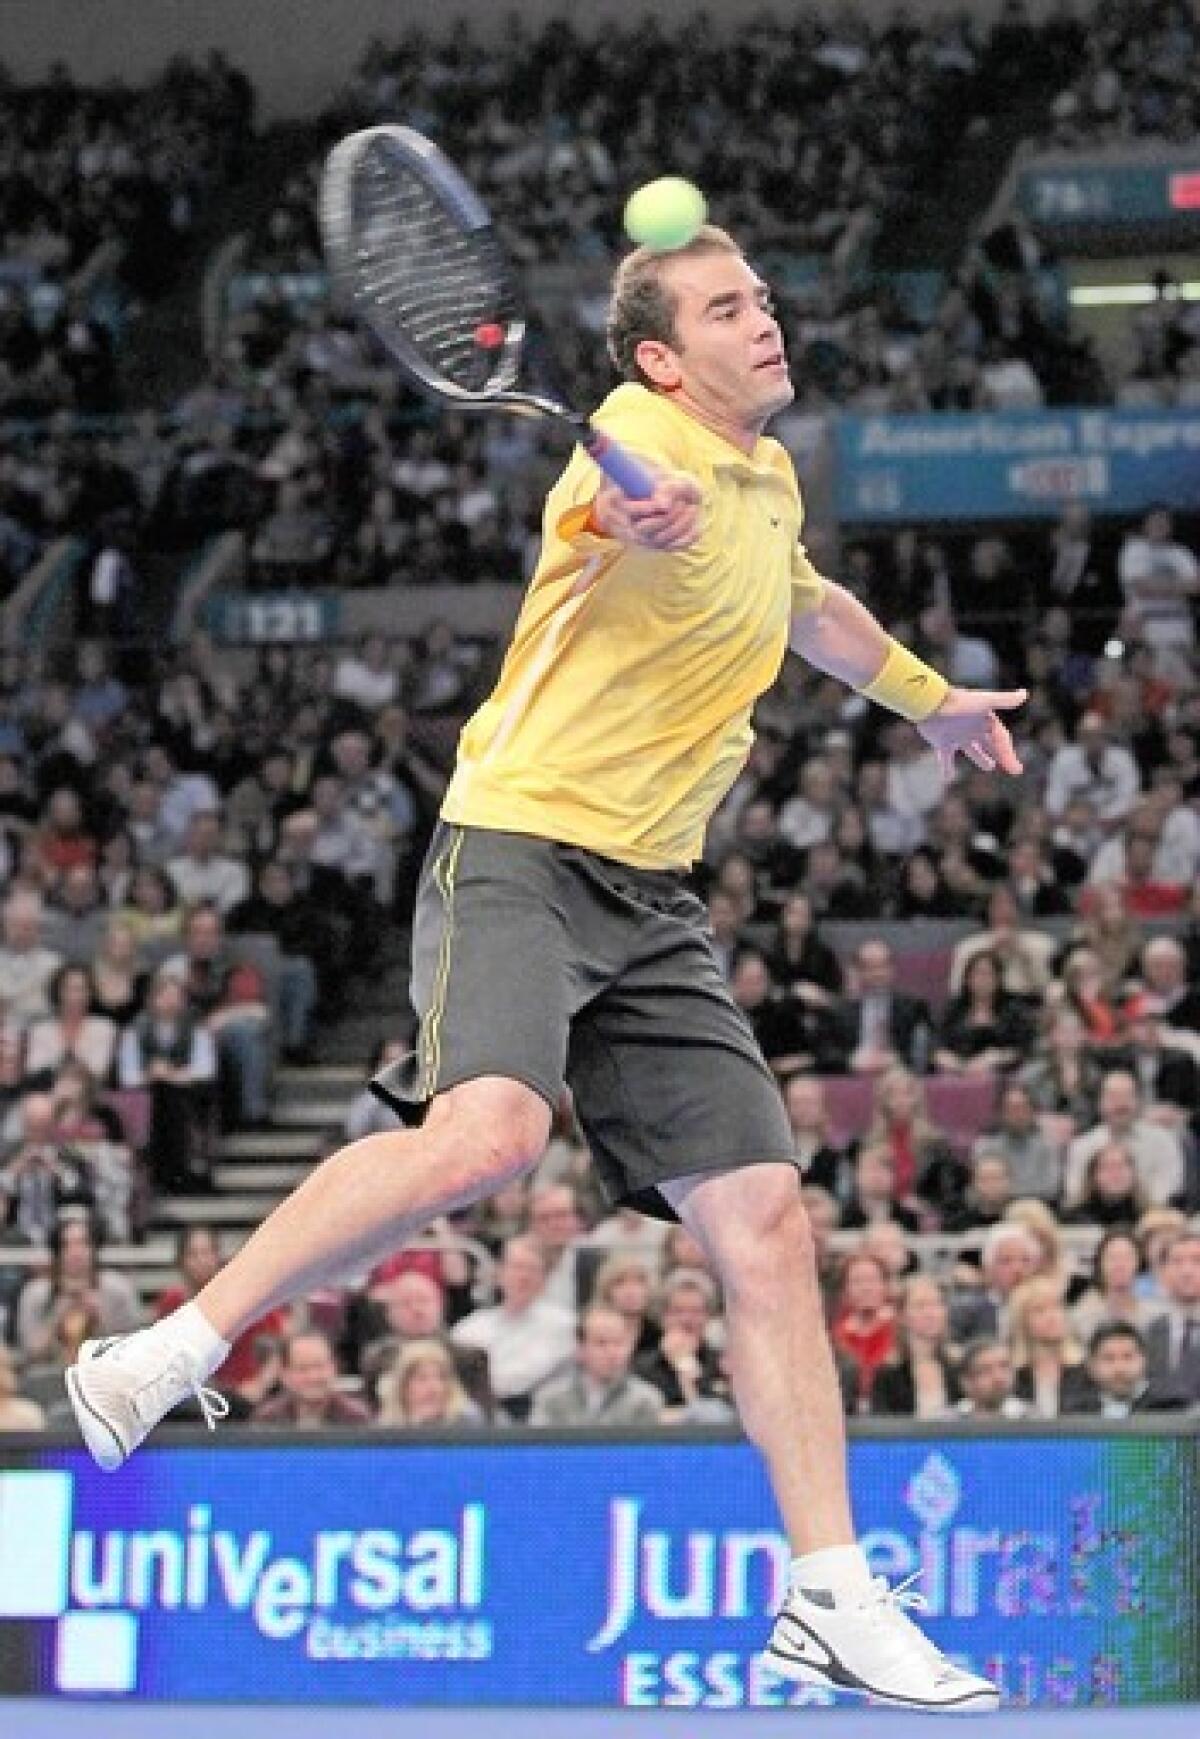 Pete Sampras is the Newport Beach Breakers' marquee player and will be playing July 9 at The Tennis Club Newport Beach.